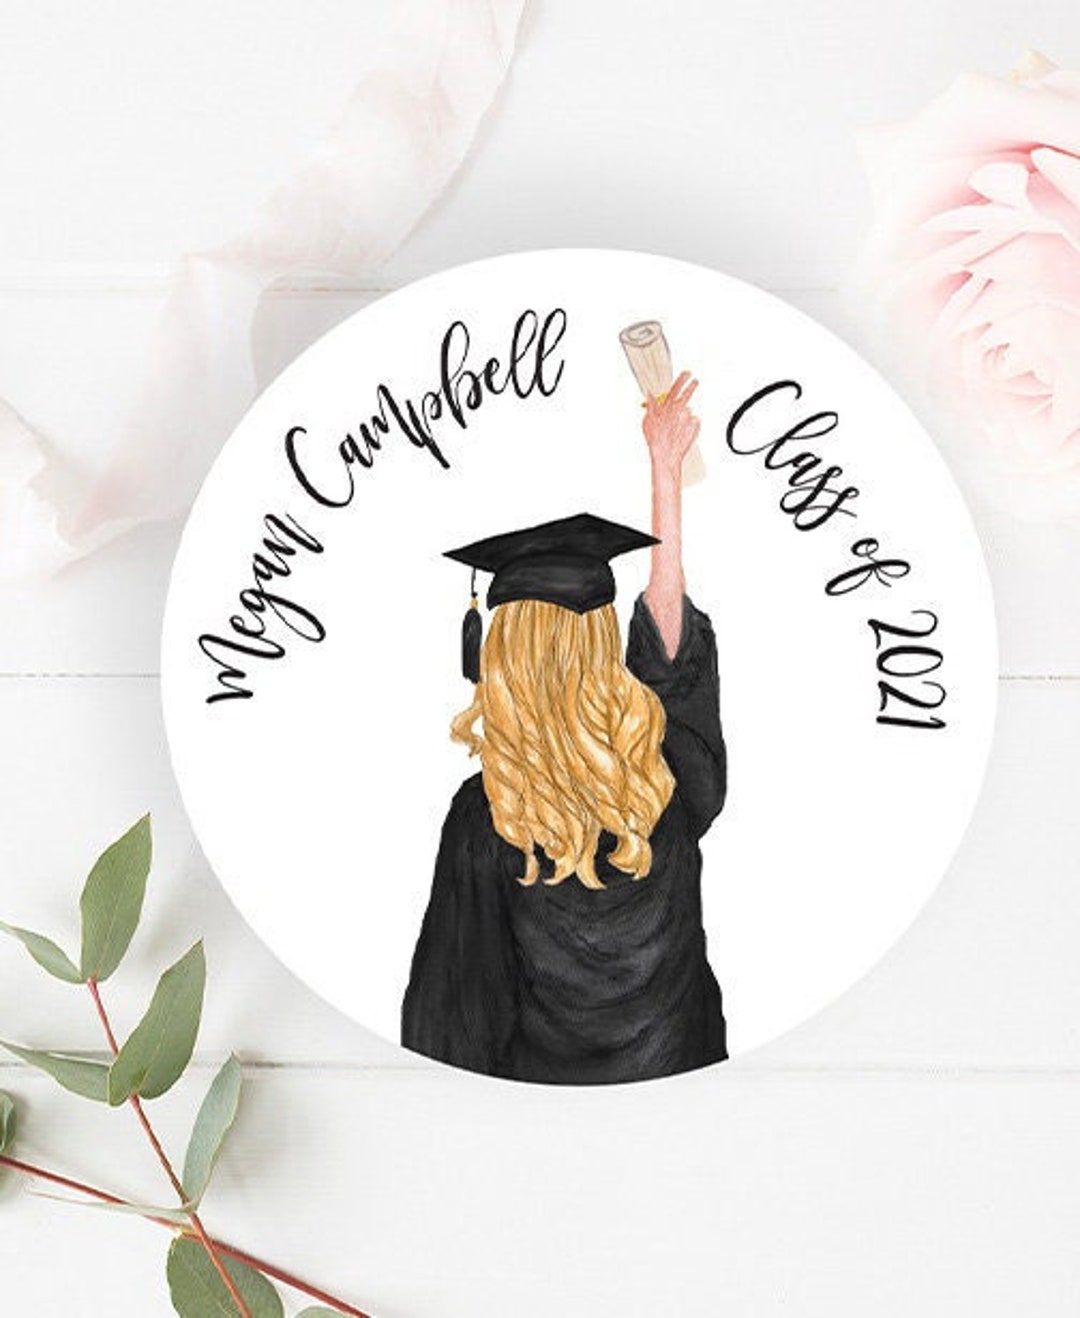 Graduation Congratulations You Did It Personalized Stickers for Envelopes,  Candy, Bags. 4 Sizes & Many Colors to Choose From 